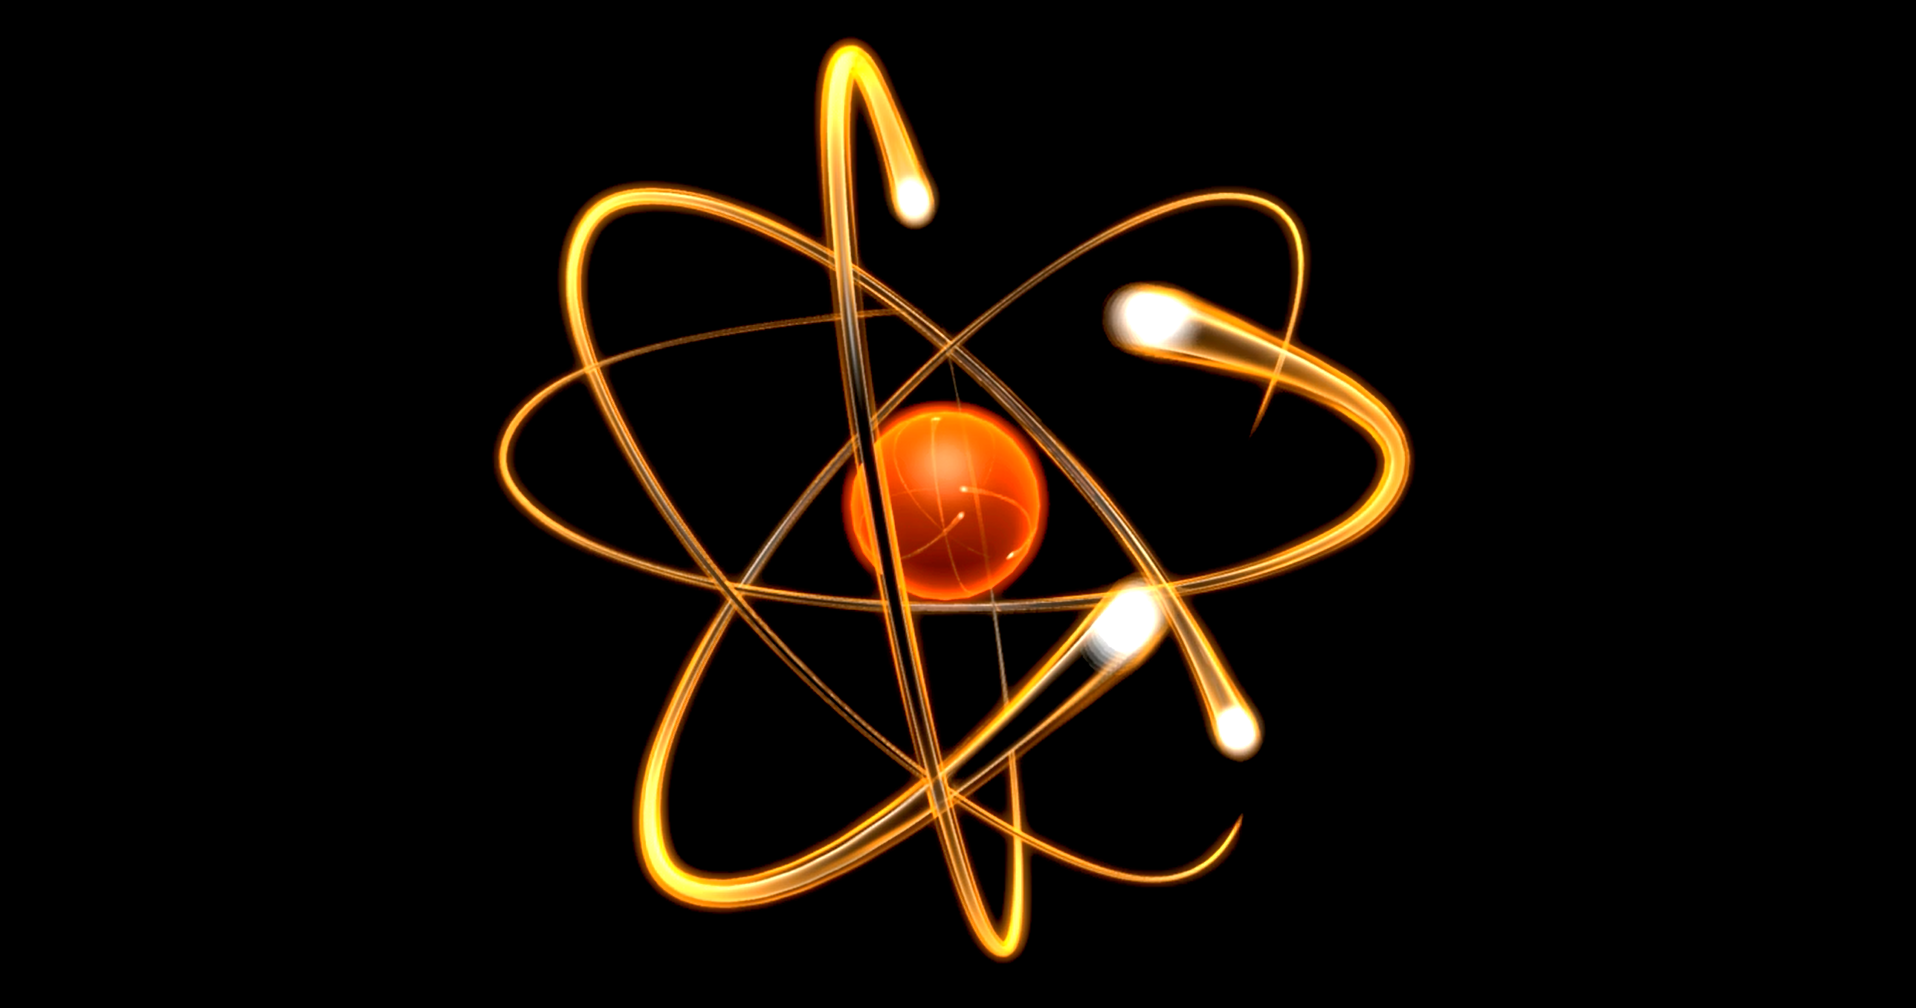 Representative of Nuclear power is the atom